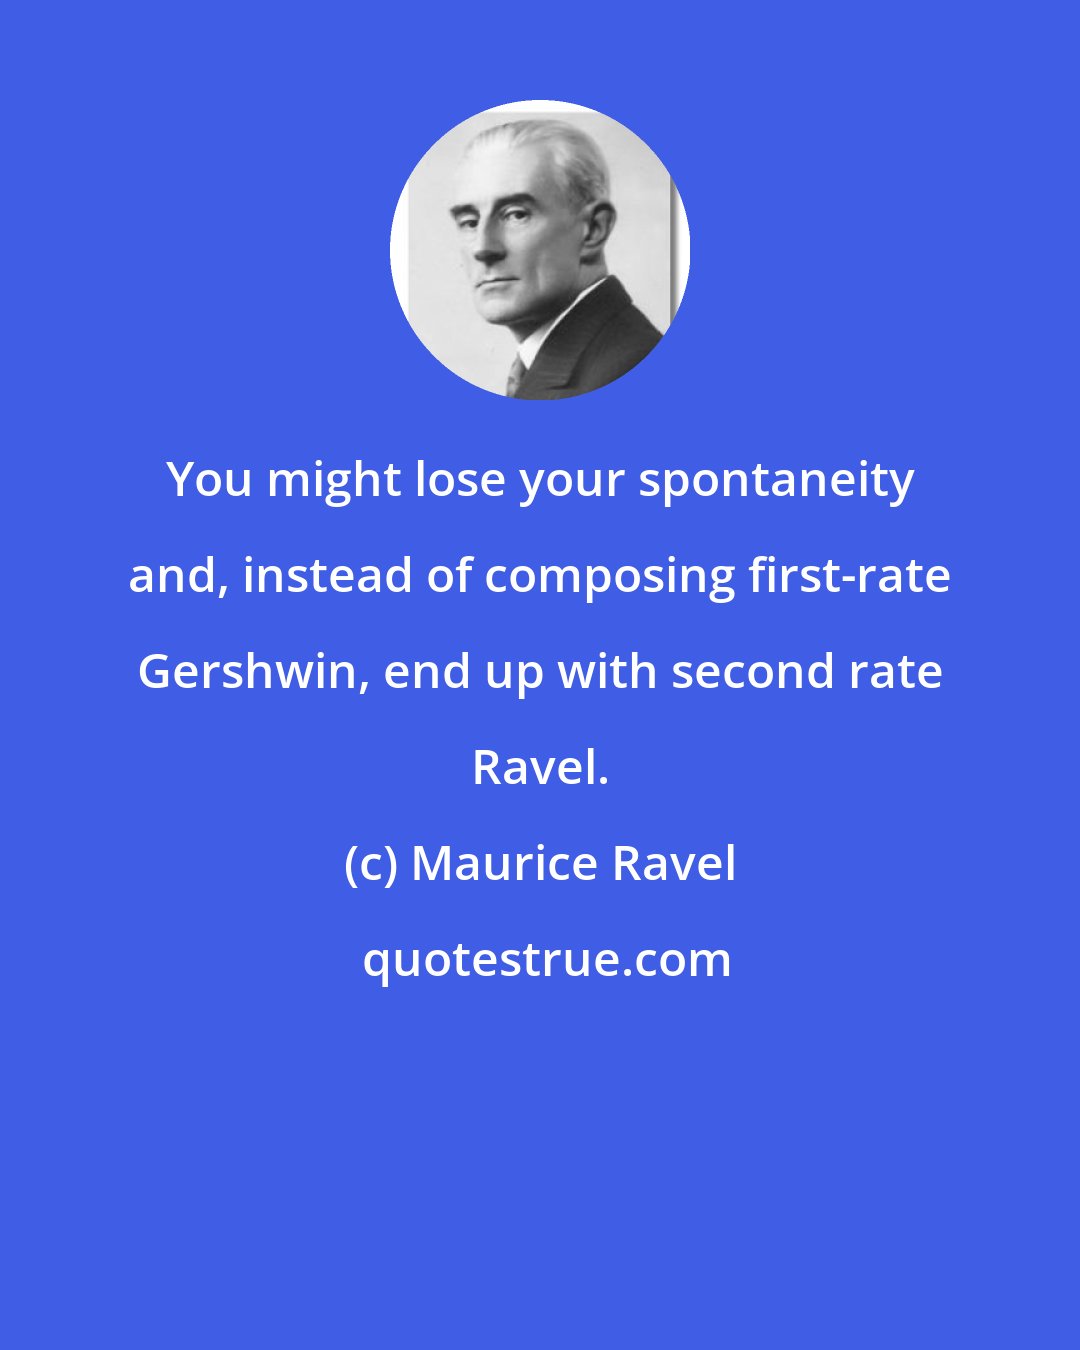 Maurice Ravel: You might lose your spontaneity and, instead of composing first-rate Gershwin, end up with second rate Ravel.